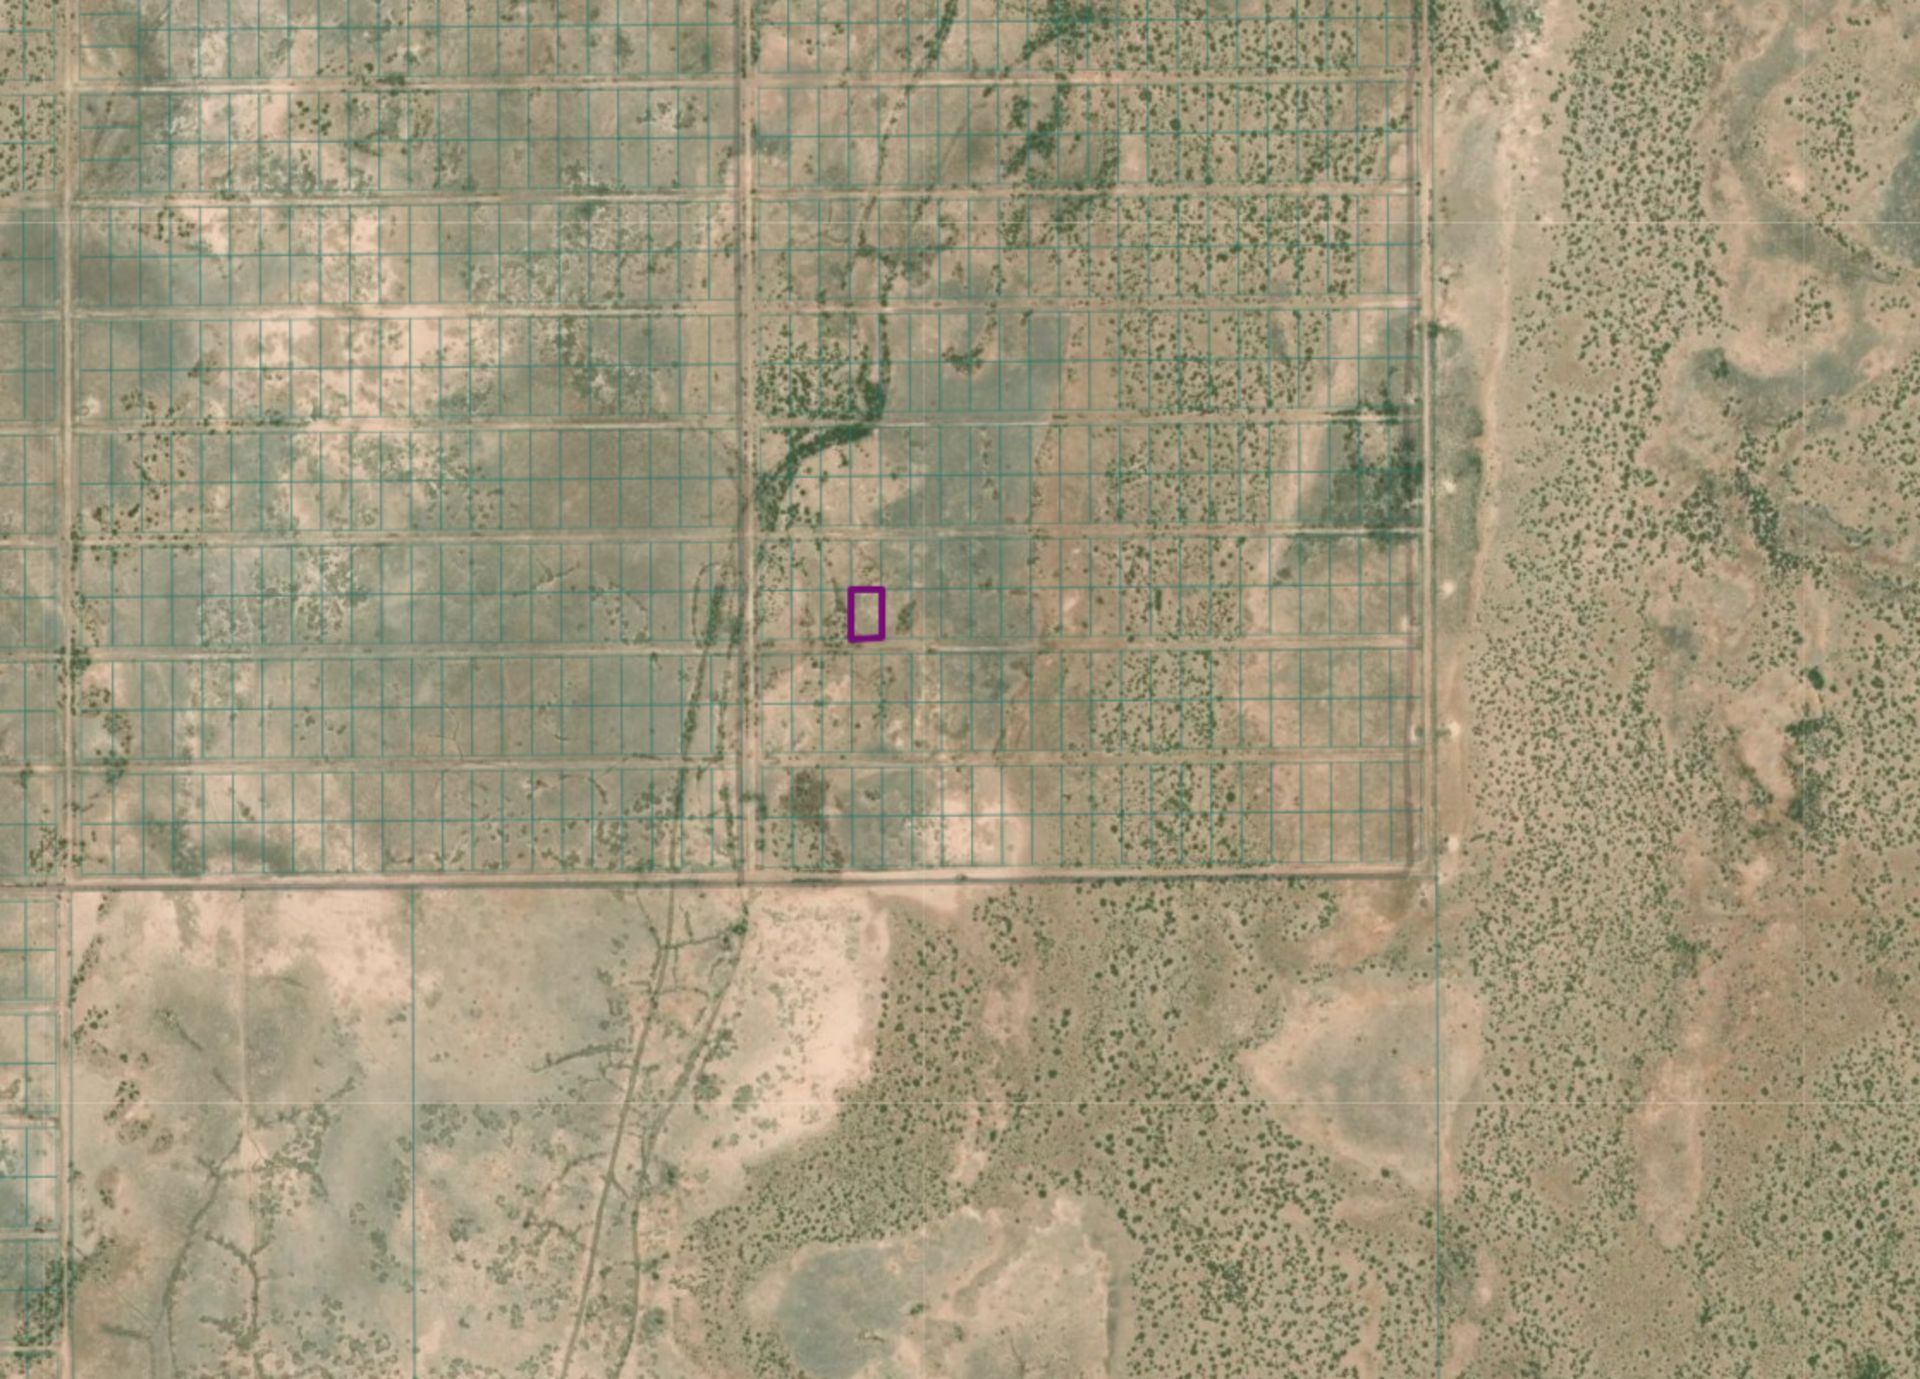 Claim Your Half-Acre Slice of Luna County, New Mexico! - Image 9 of 15